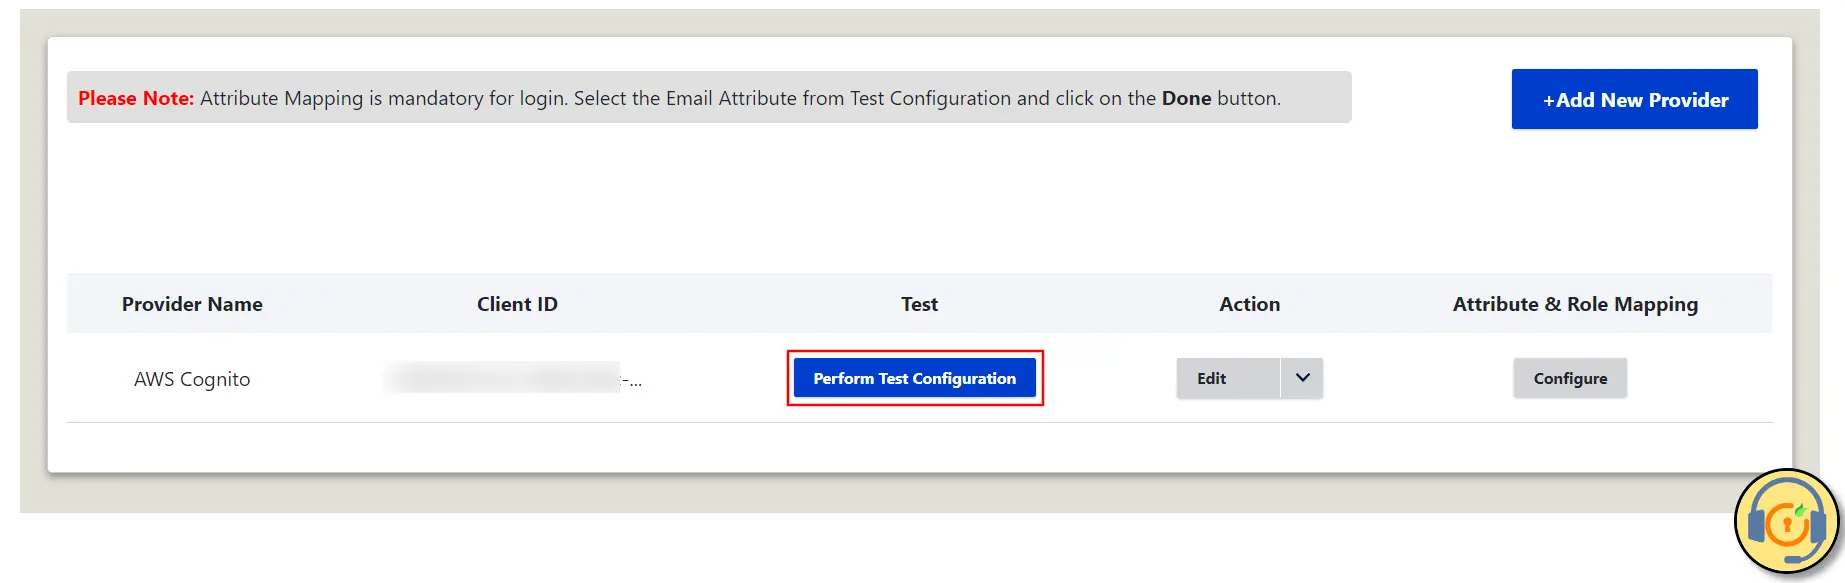 Drupal OAuth OpenID Single Single On Click on Perform Test Configuration button to check the SSO Connection